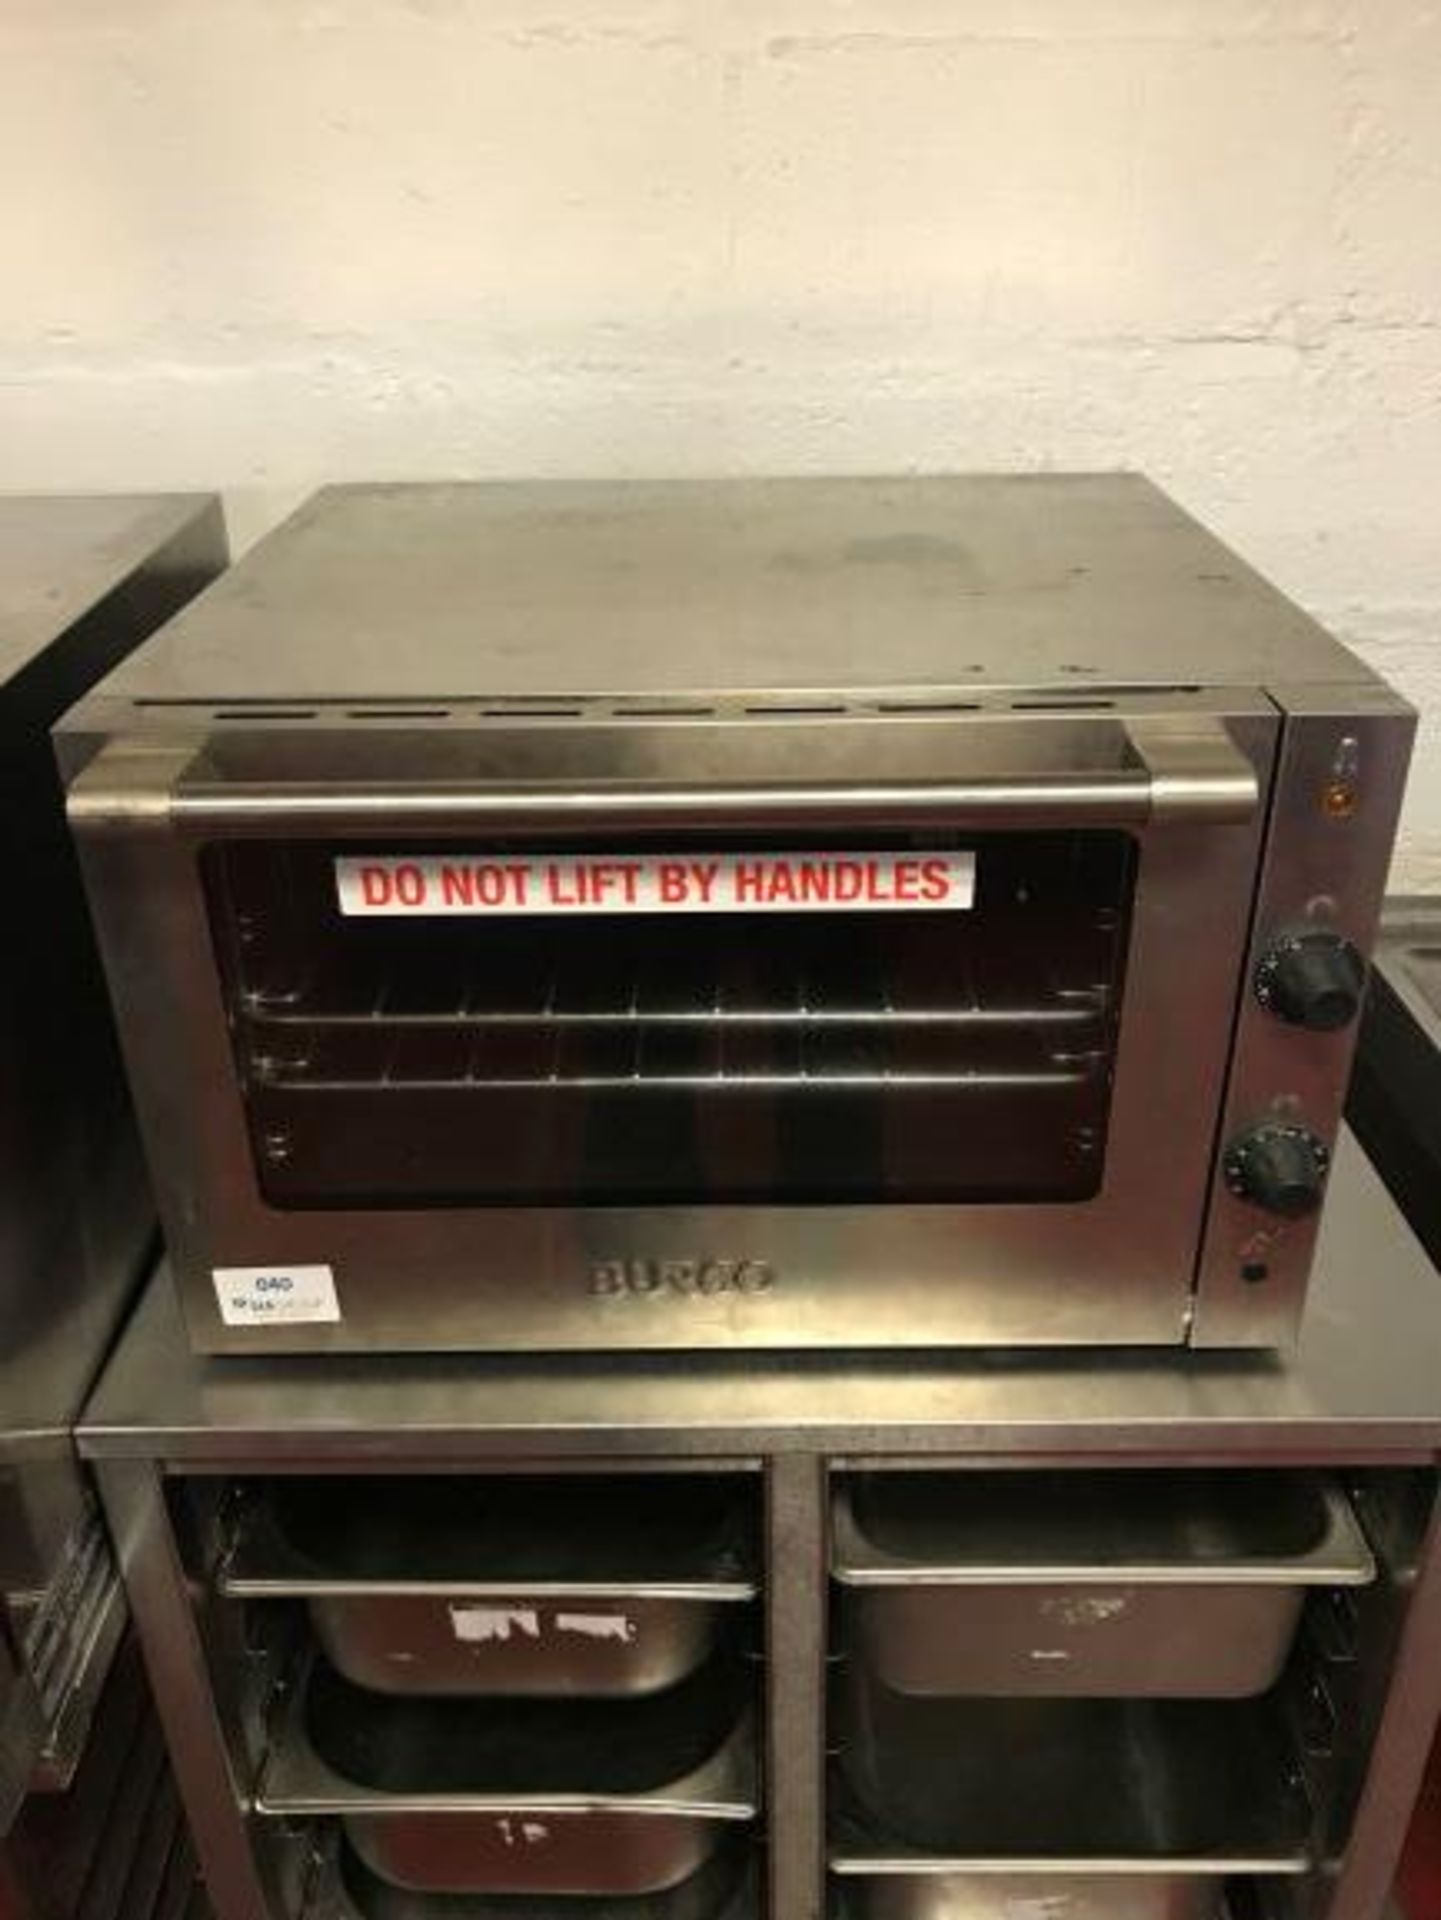 Burco BC CTC002 stainless steel countertop convection oven